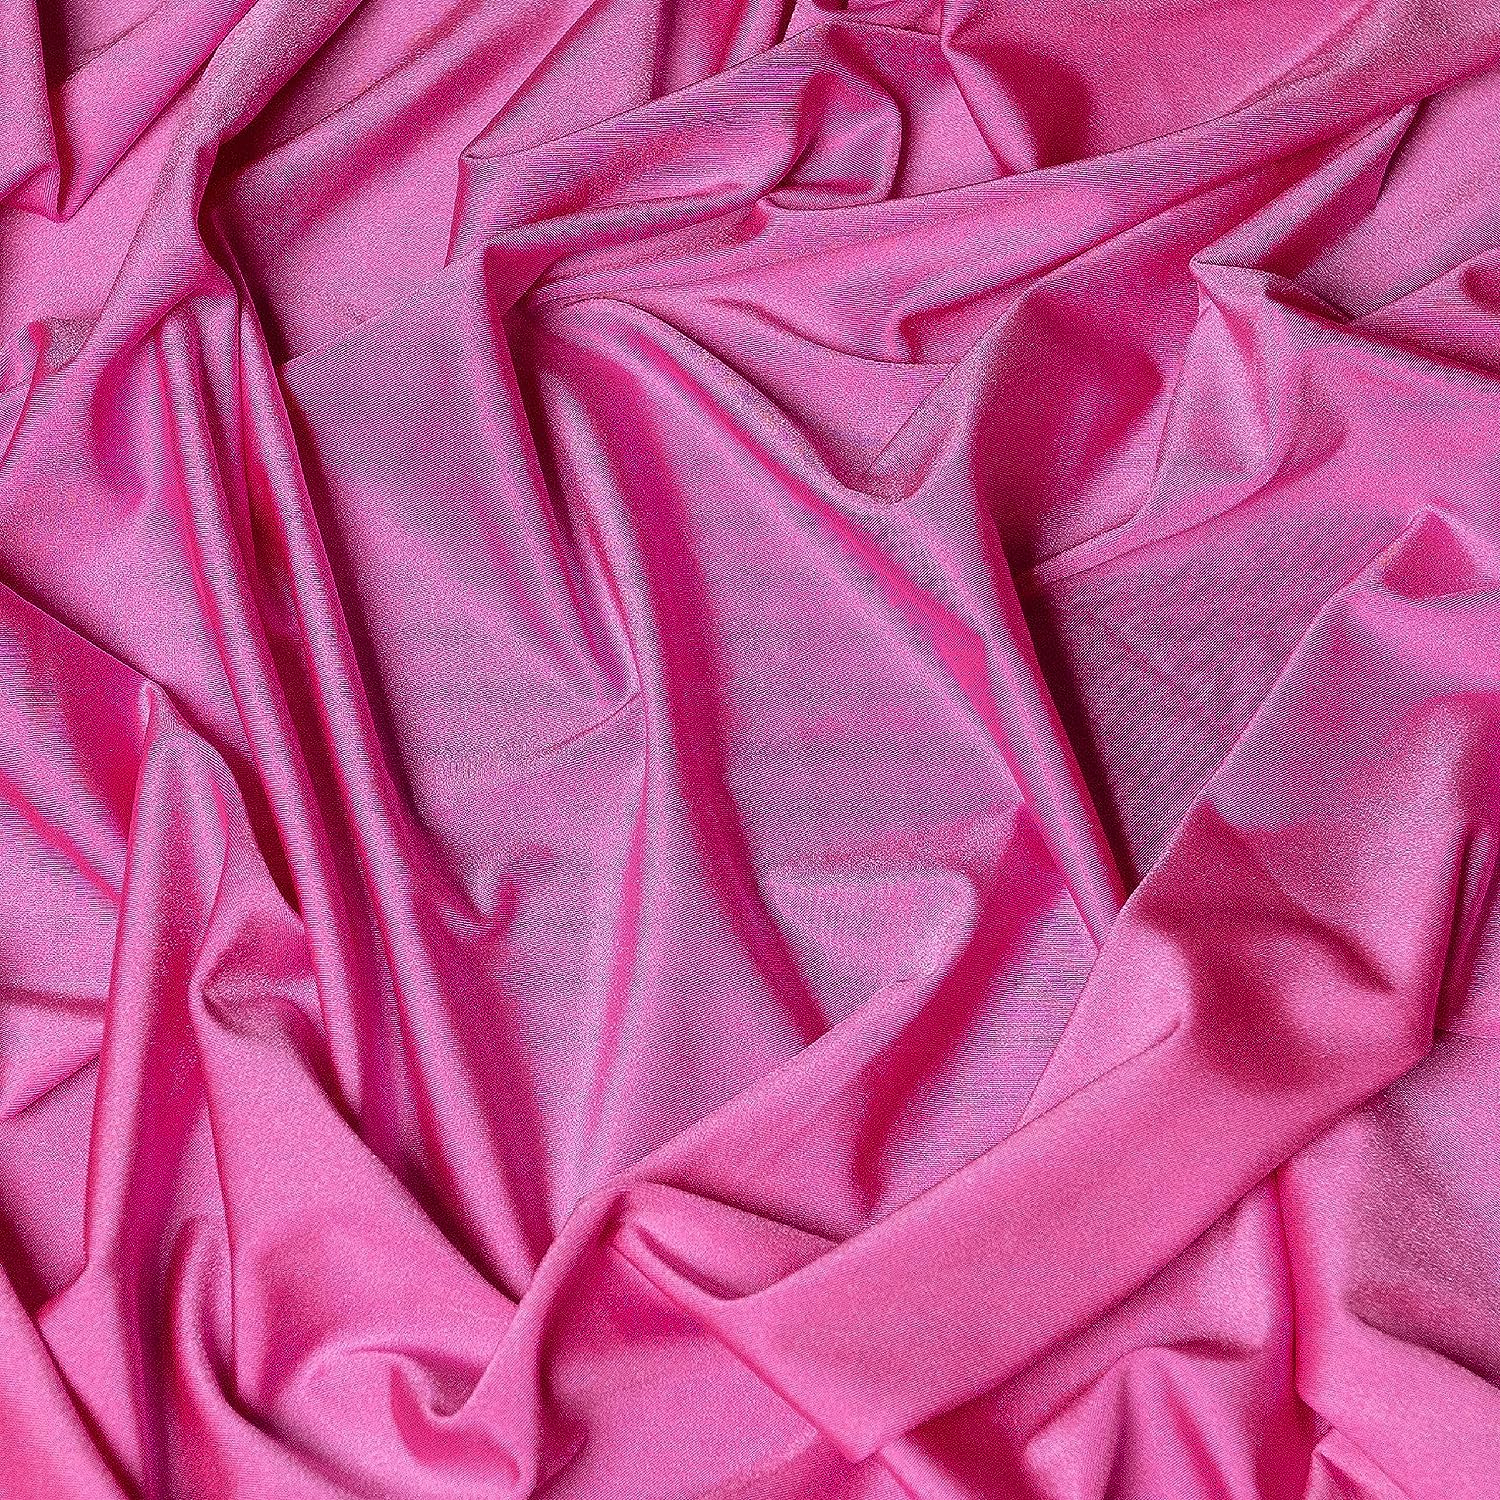  Spandex Fabric Metallic HOT Pink / 60 Wide/Sold by The Yard :  Arts, Crafts & Sewing